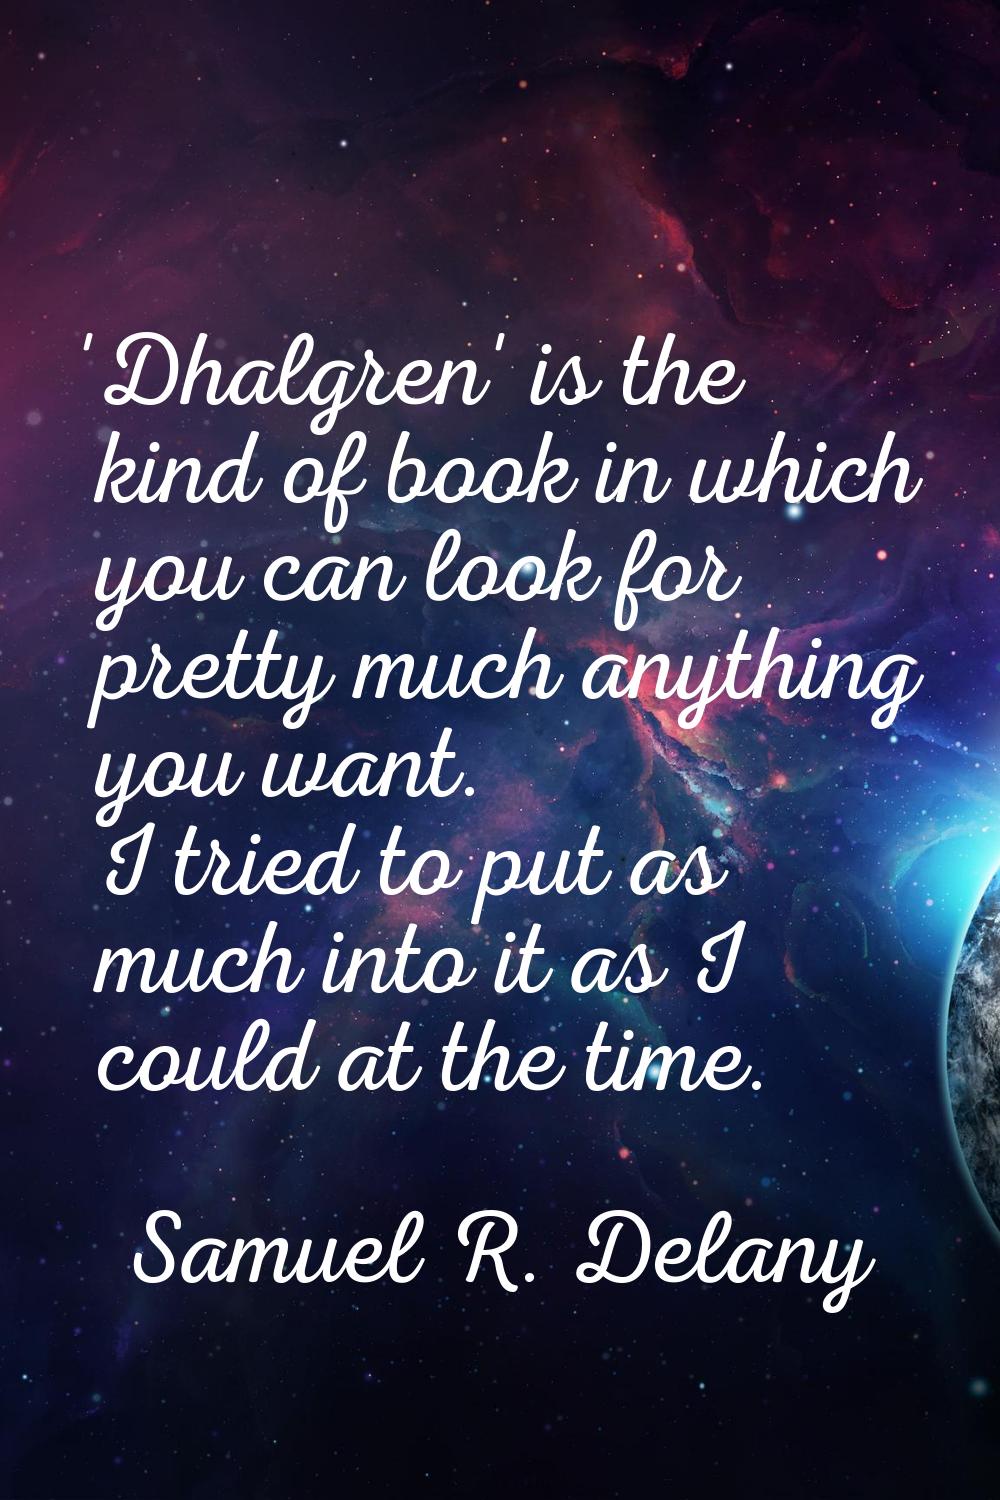 'Dhalgren' is the kind of book in which you can look for pretty much anything you want. I tried to 